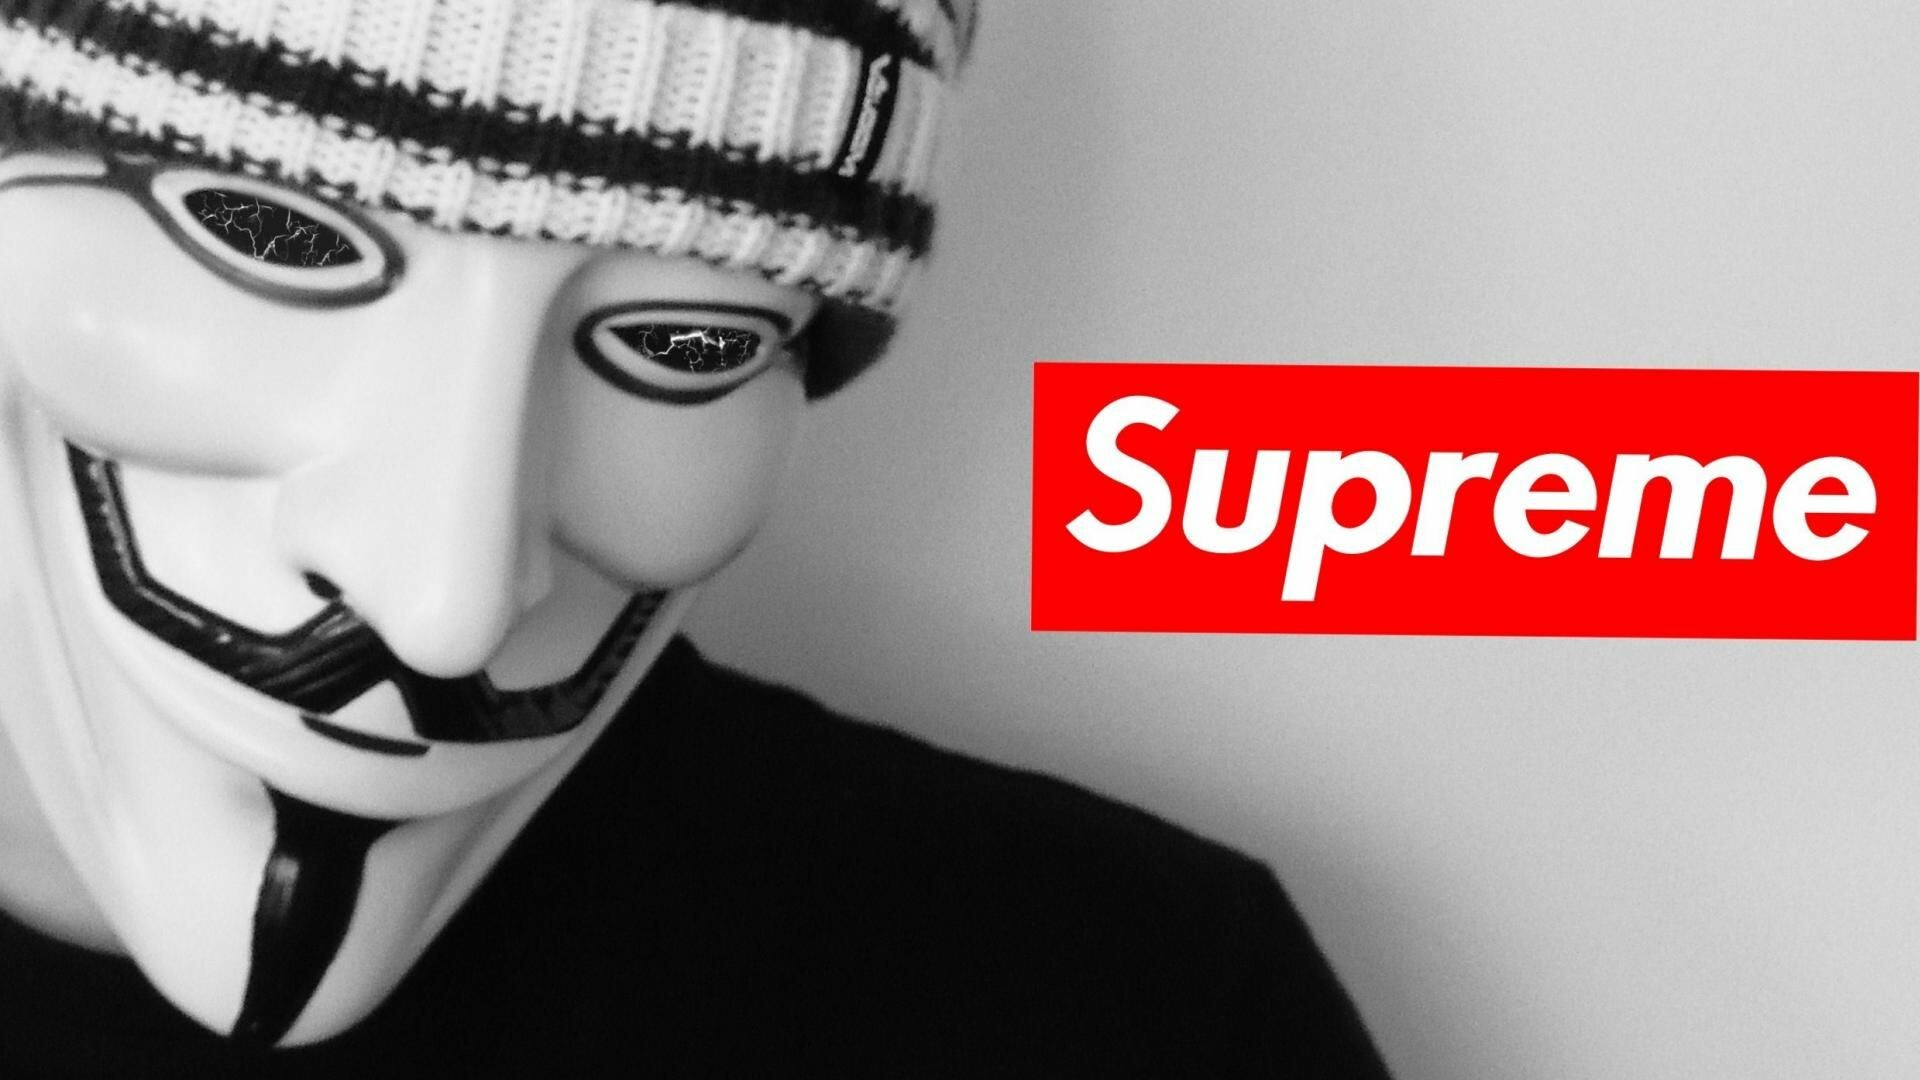 Supreme Laptop Wallpaper: HD, 4K, 5K for PC and Mobile. Download free image for iPhone, Android